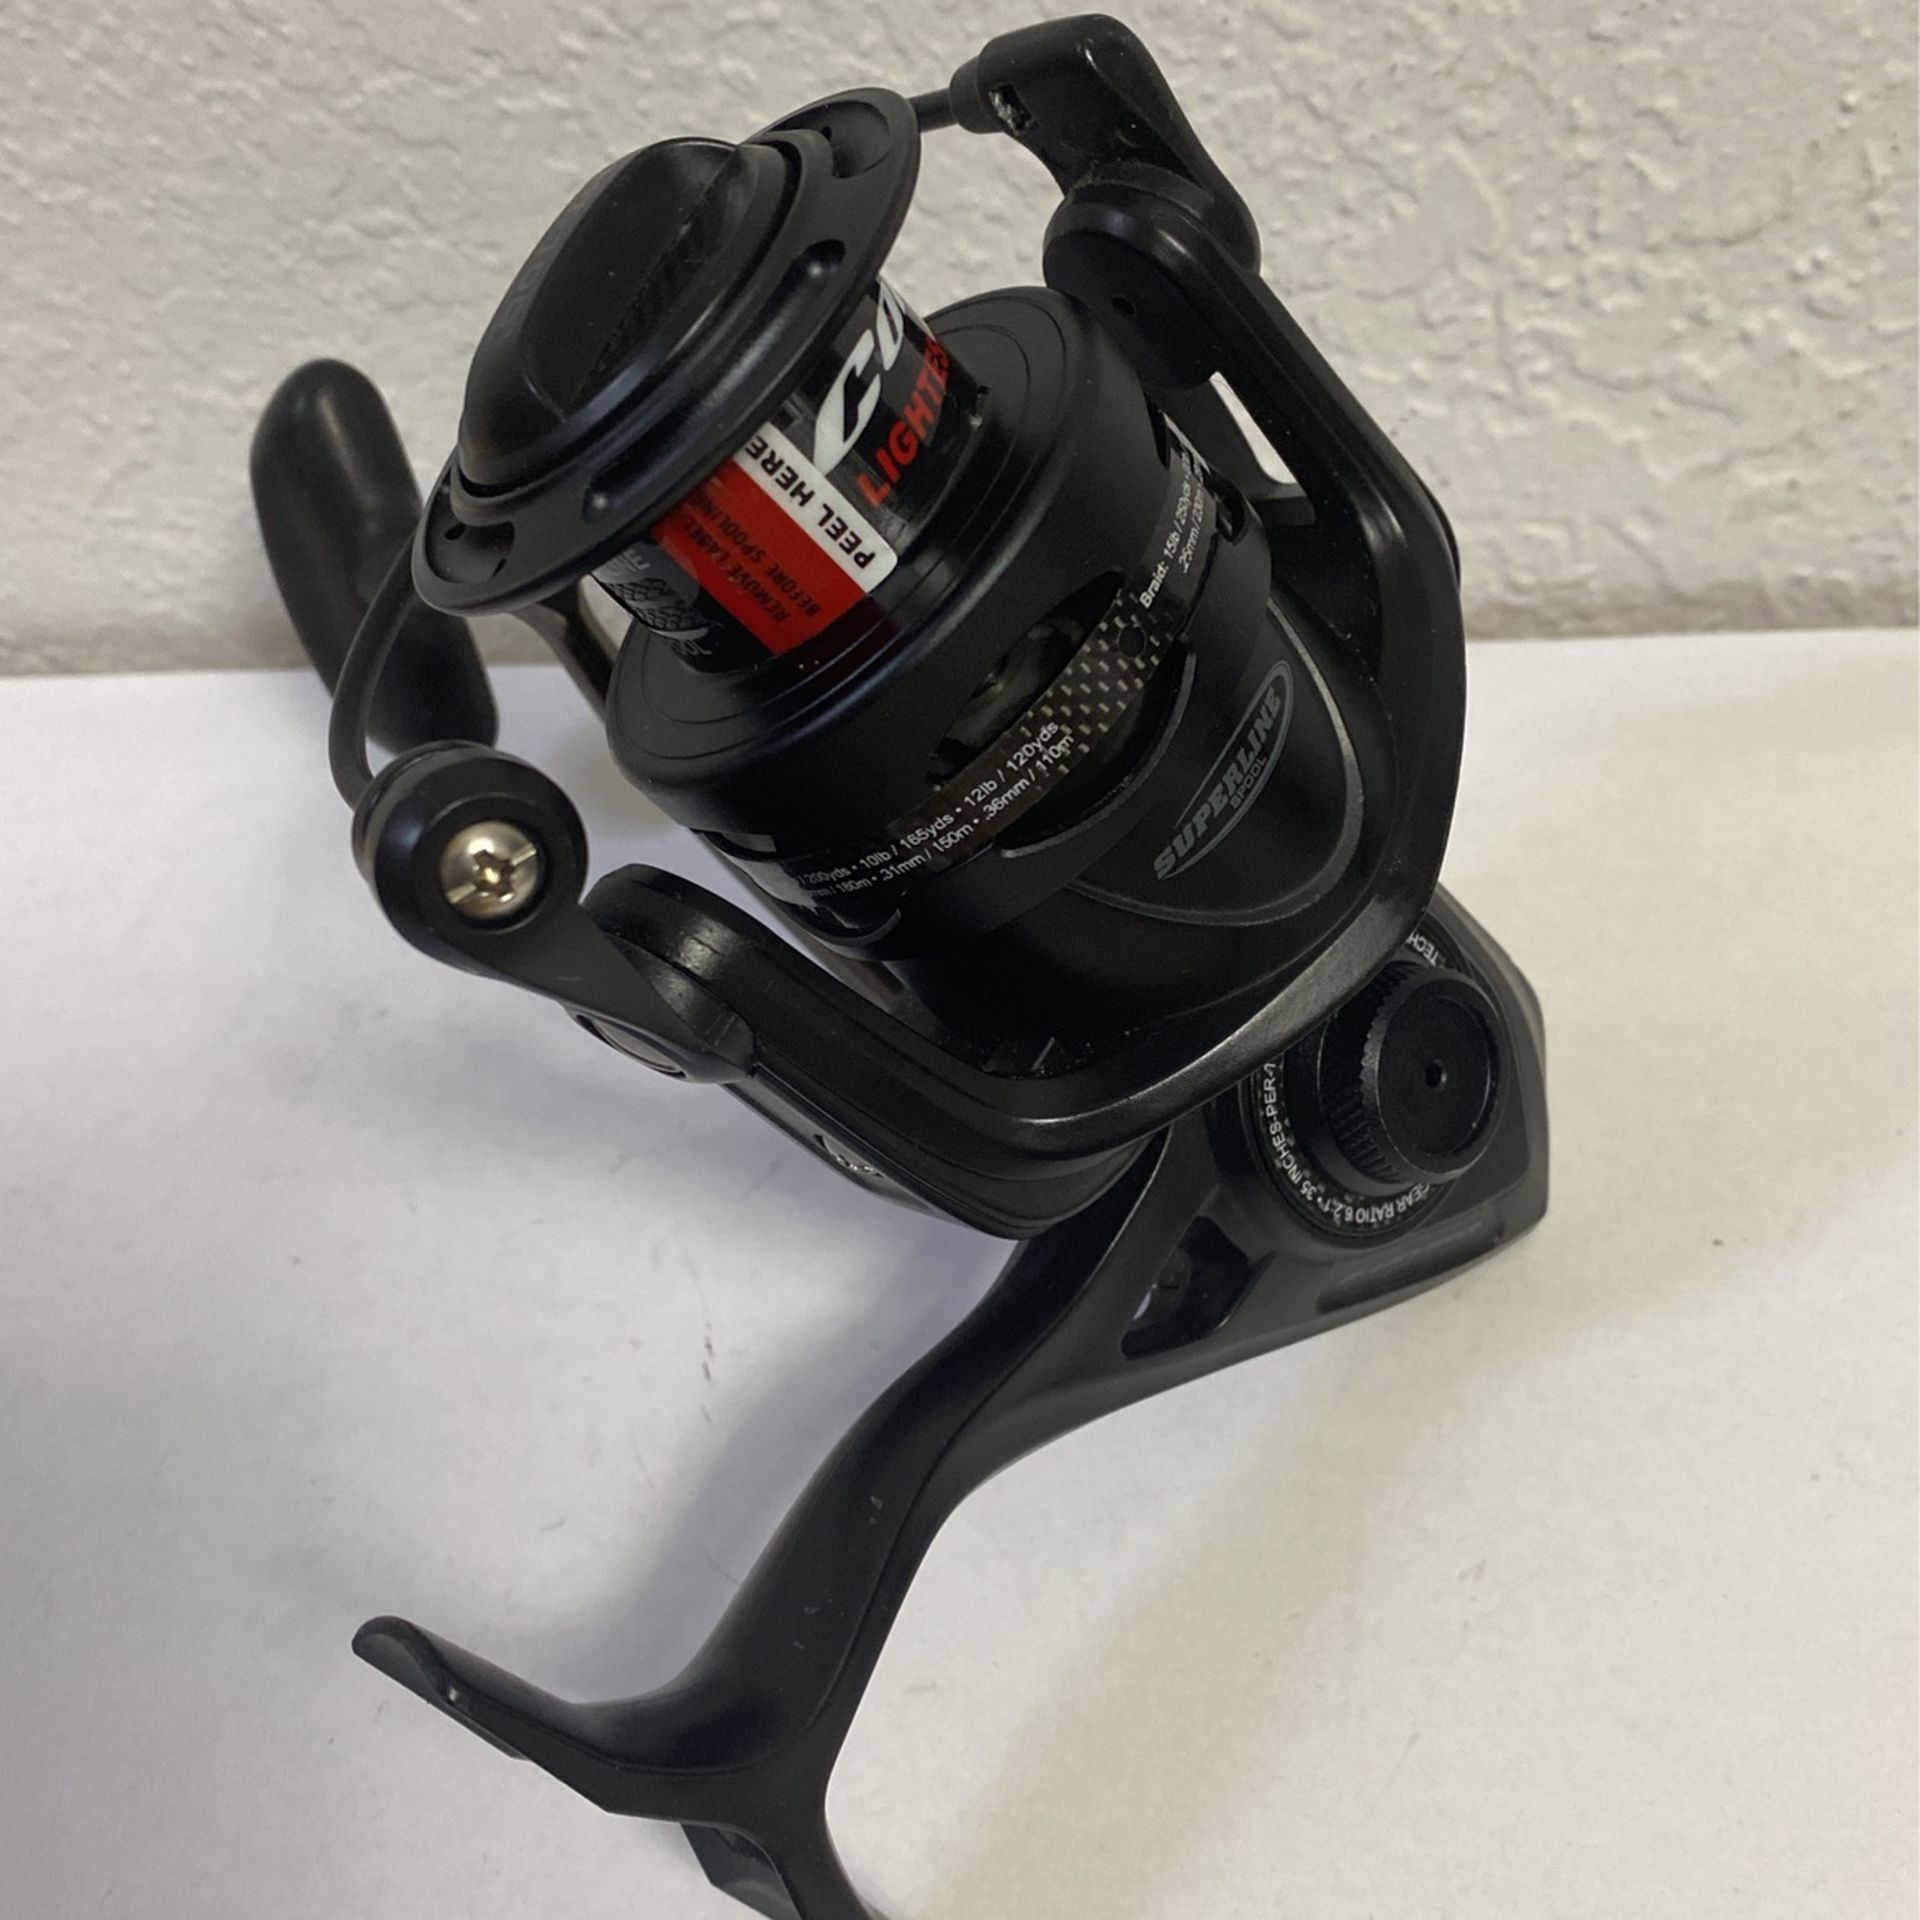 Penn Conflict II 3000 Spinning Reel for Sale in Miami, FL - OfferUp